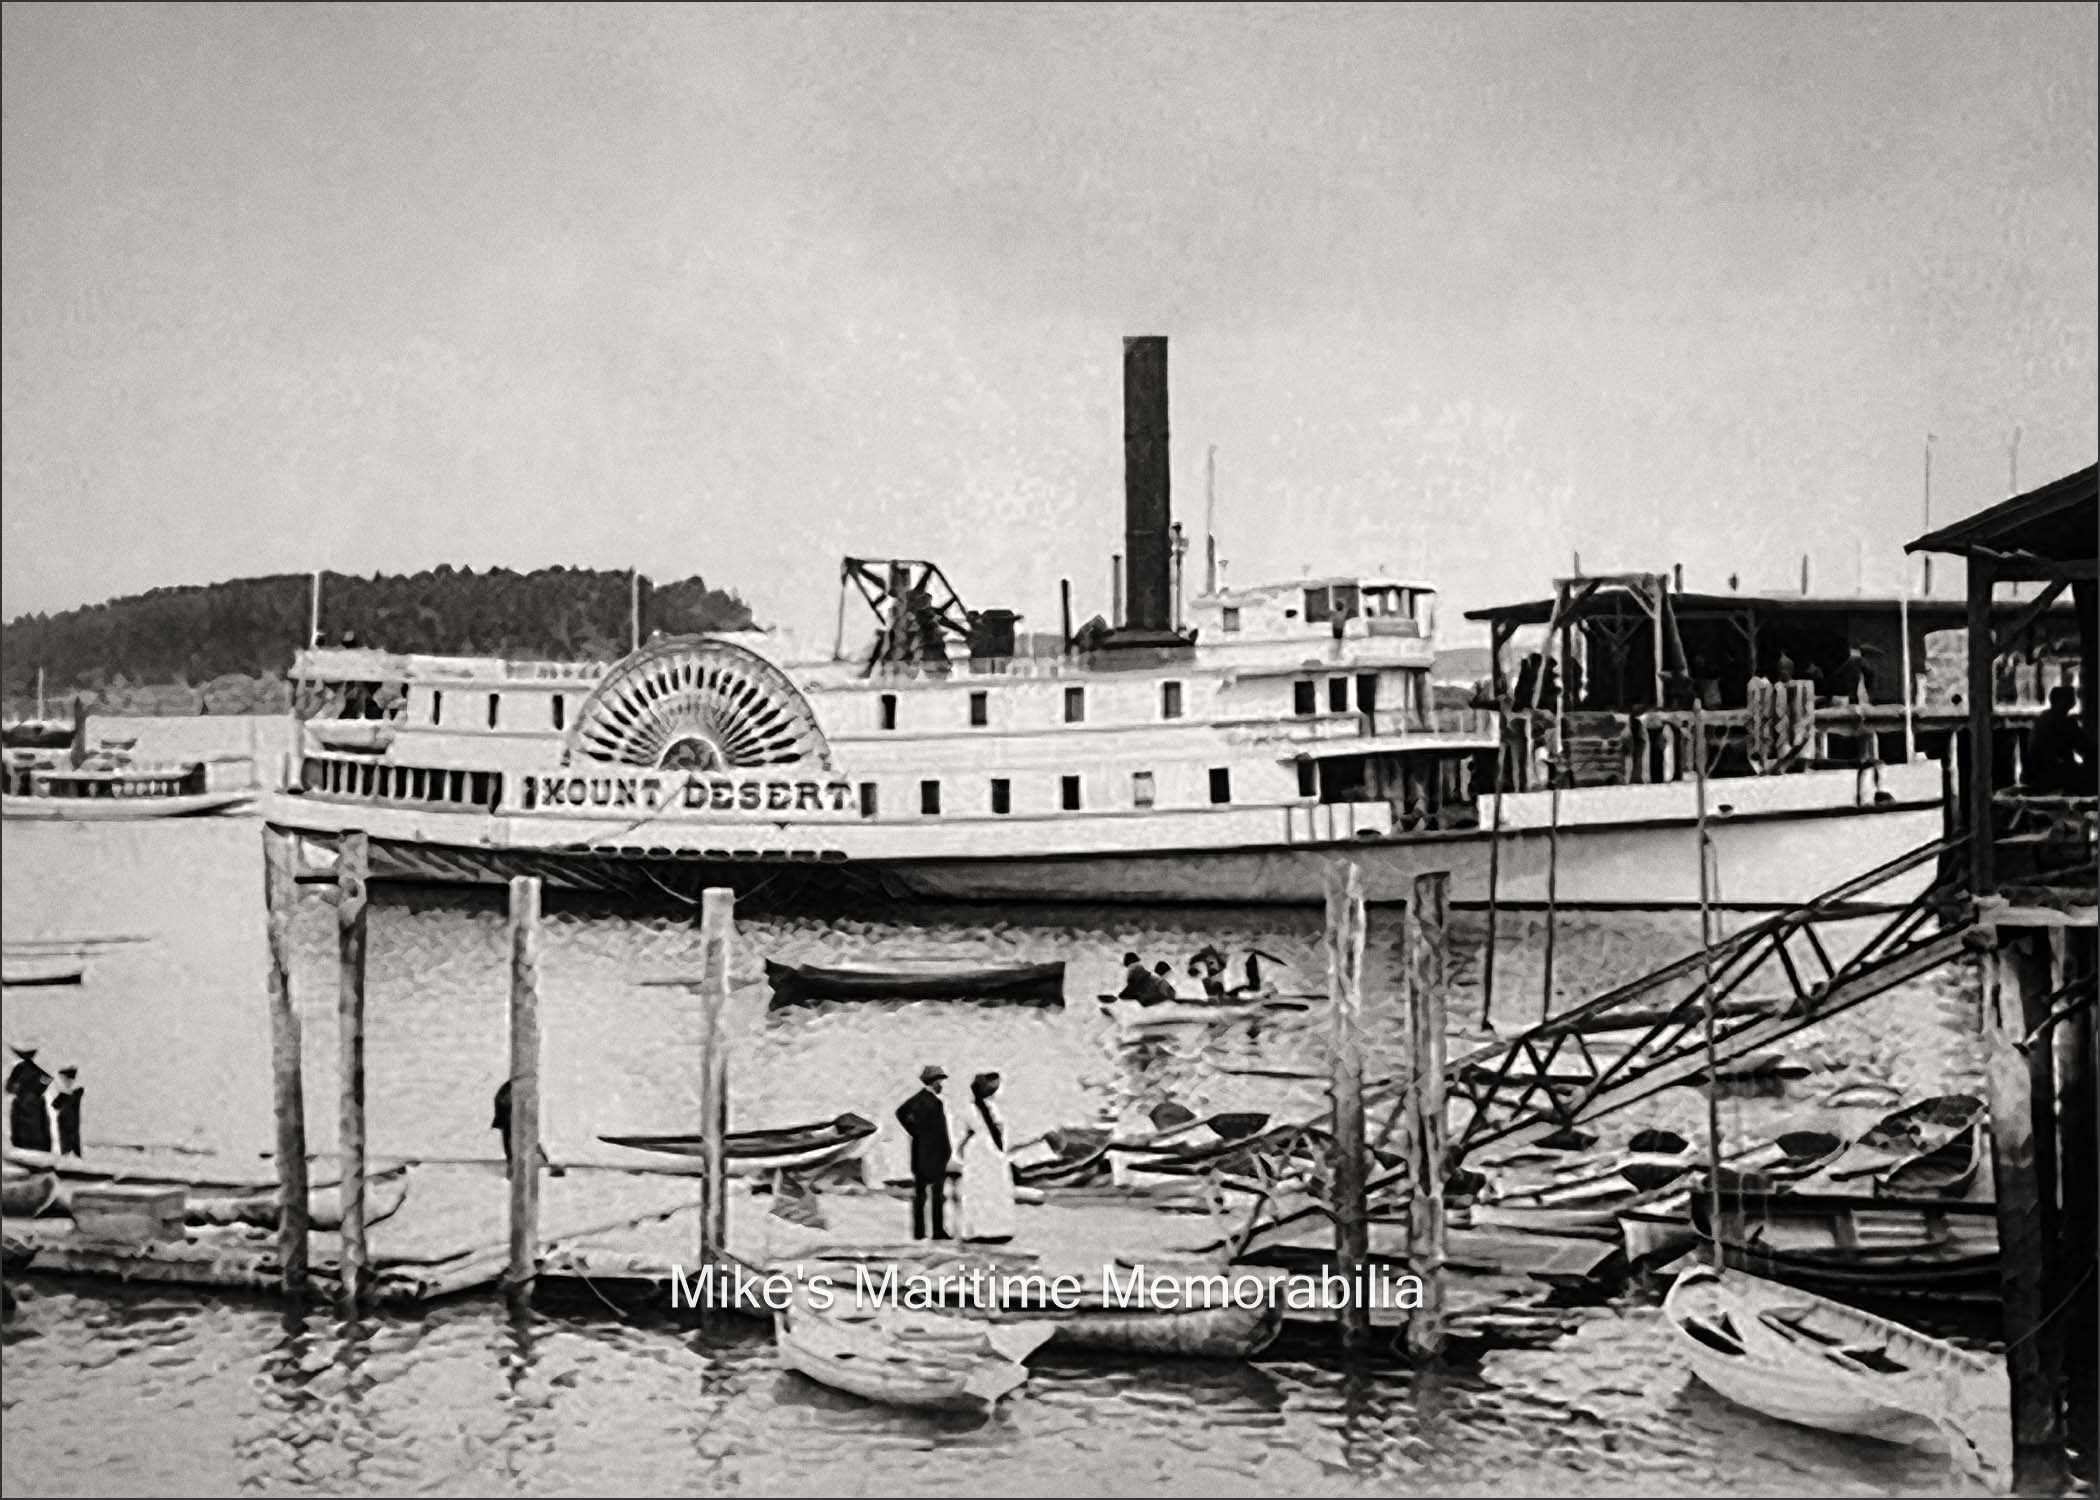 MOUNT DESERT, New York City – 1890 The "MOUNT DESERT" side-wheel steamboat was built in 1879 at Bath, ME for the Boston and Bangor Steamship Company. The photo shows the "MOUNT DESSERT" at Bar Harbor Wharf where she originally sailed as an excursion vessel and carried passengers to Mount Desert and Rockland, ME. She relocated to New York City in 1904 and began making daily trips to the fishing banks under the command of her new owner, Captain and Fishing Pilot George Beebe.